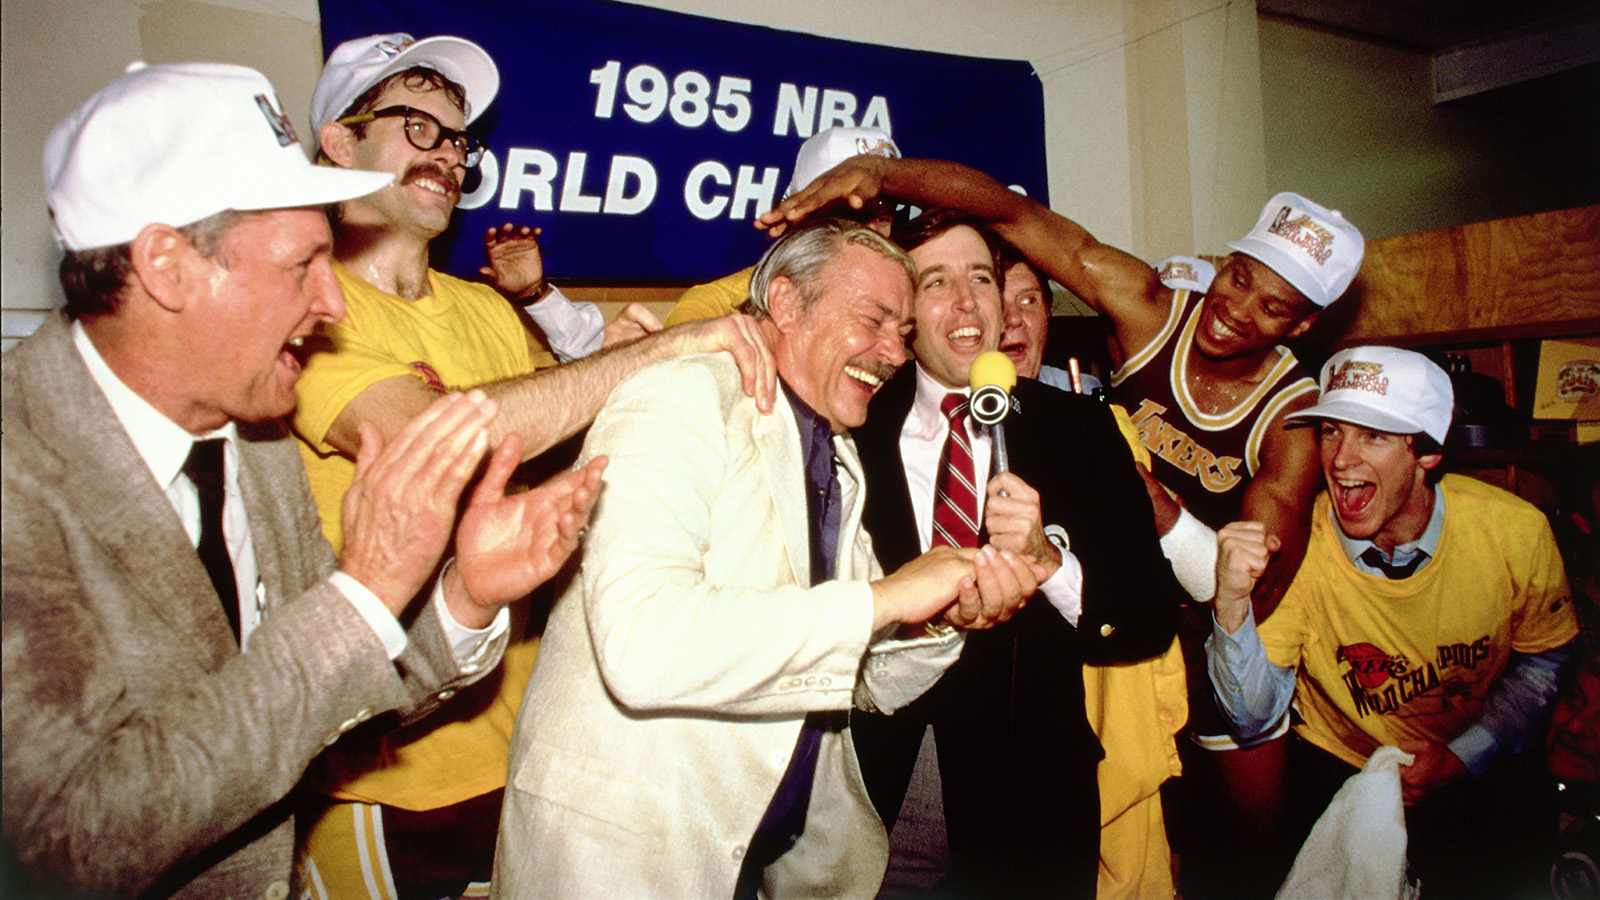 Lakers celebrate their 1985 Championship over the Celtics